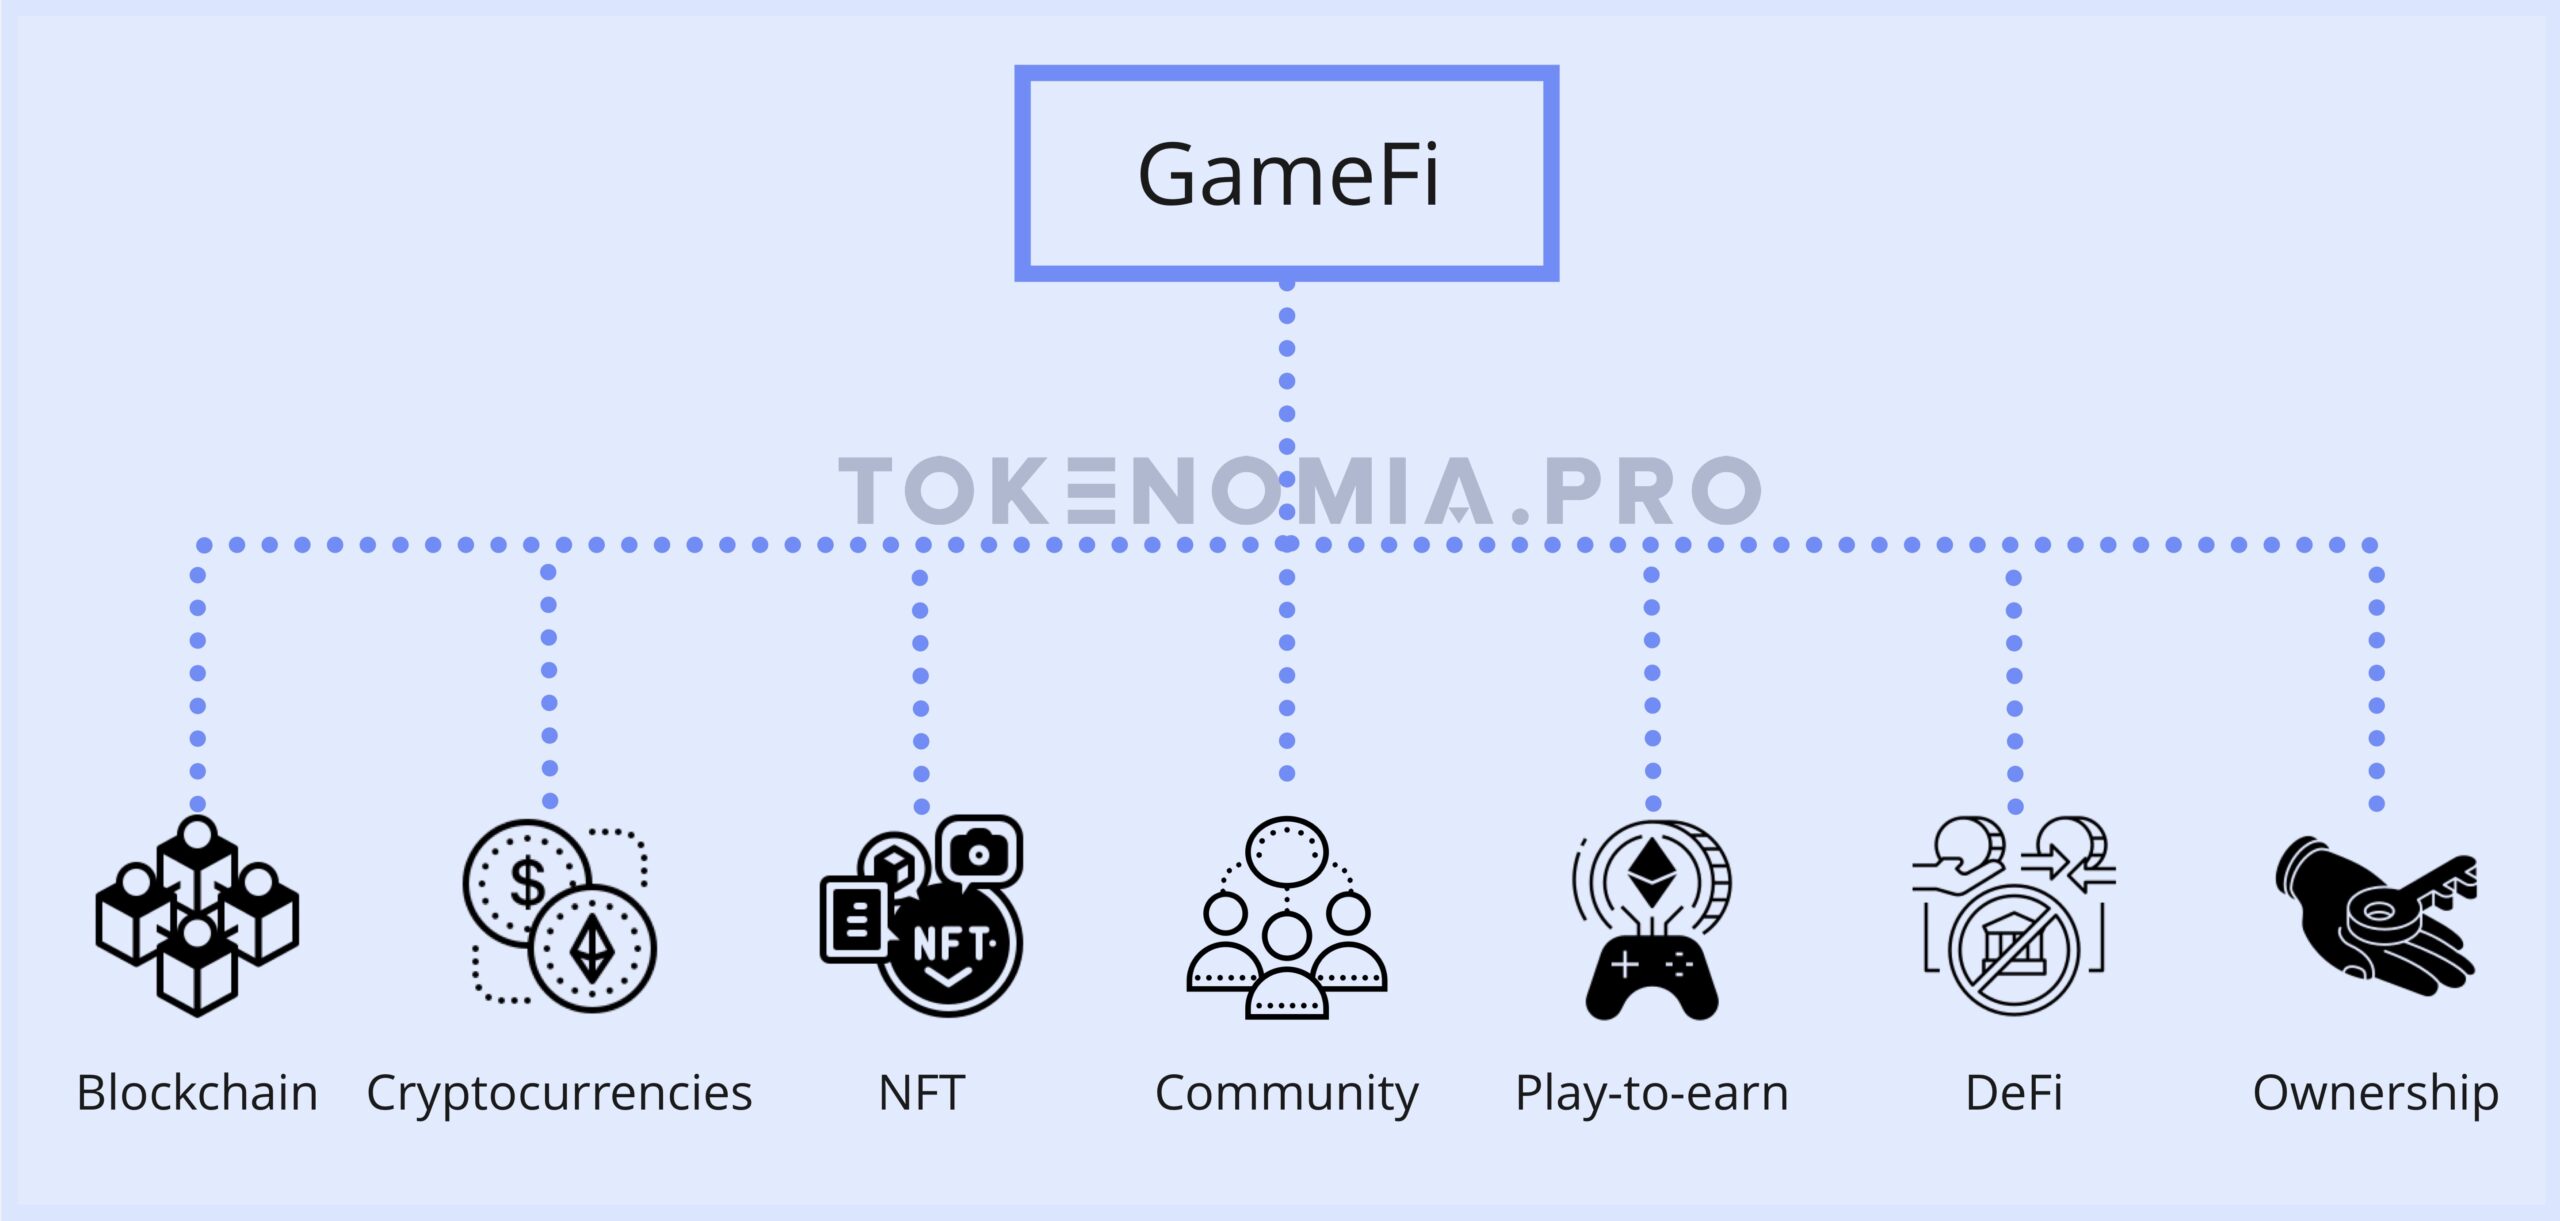 The components of GameFi